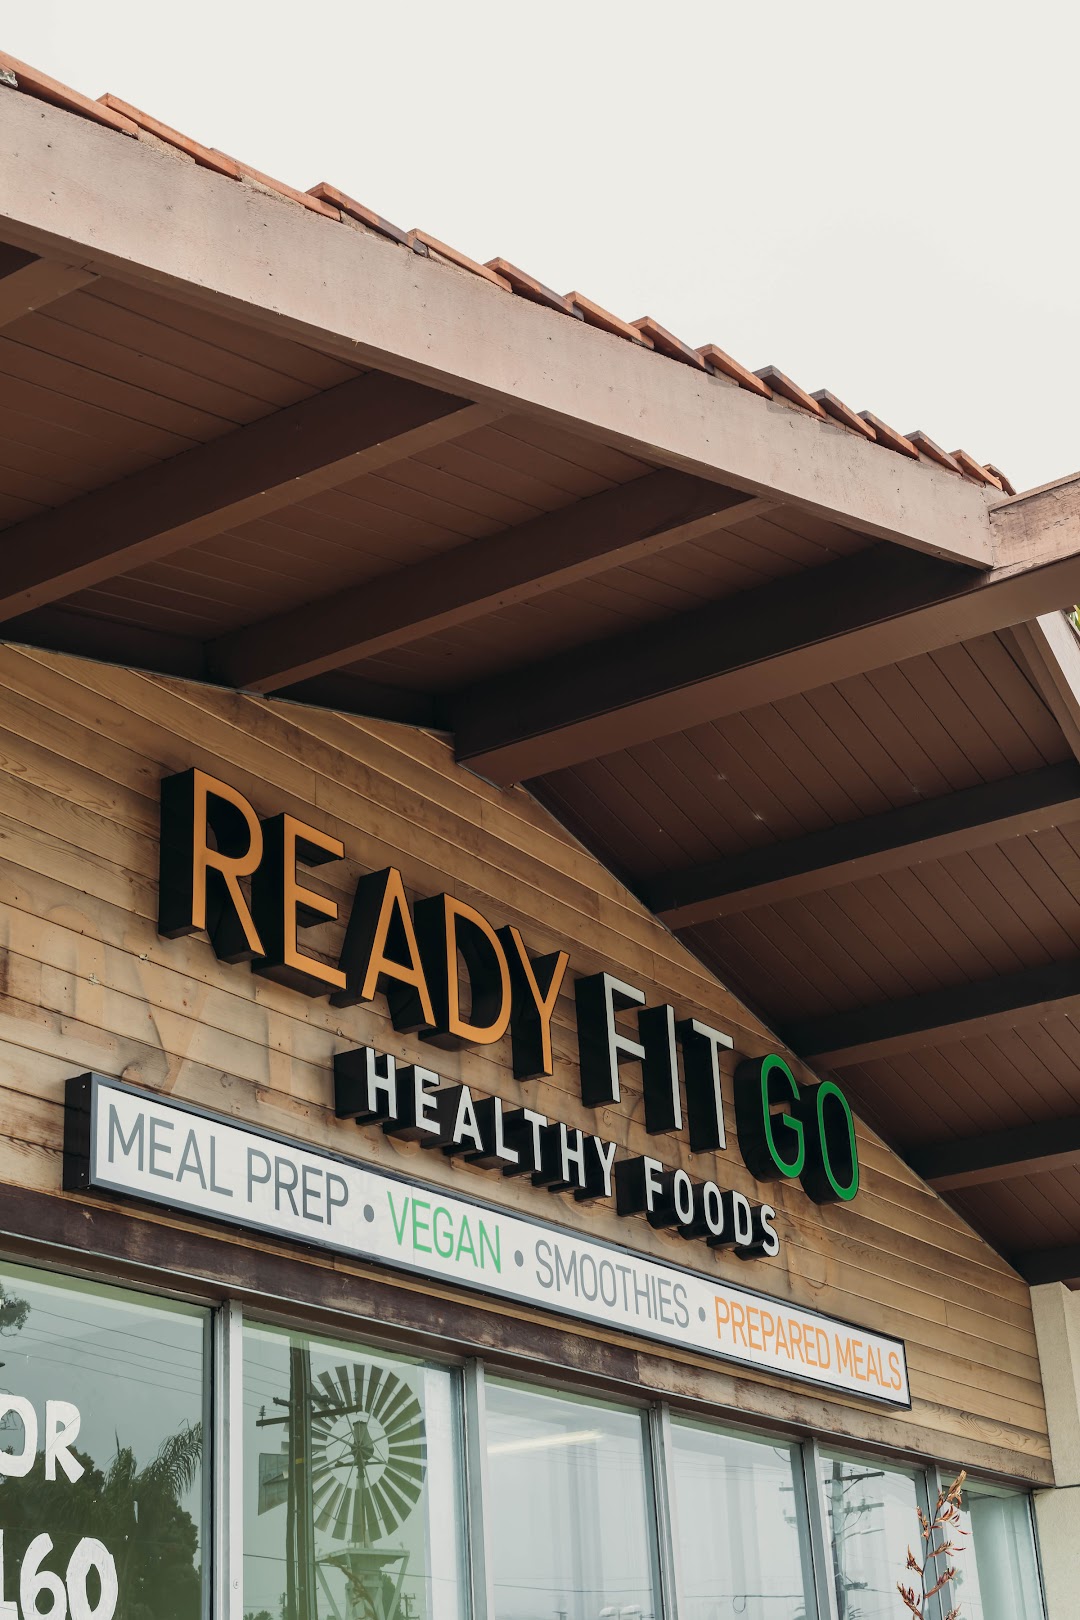 Ready Fit Go Healthy Foods